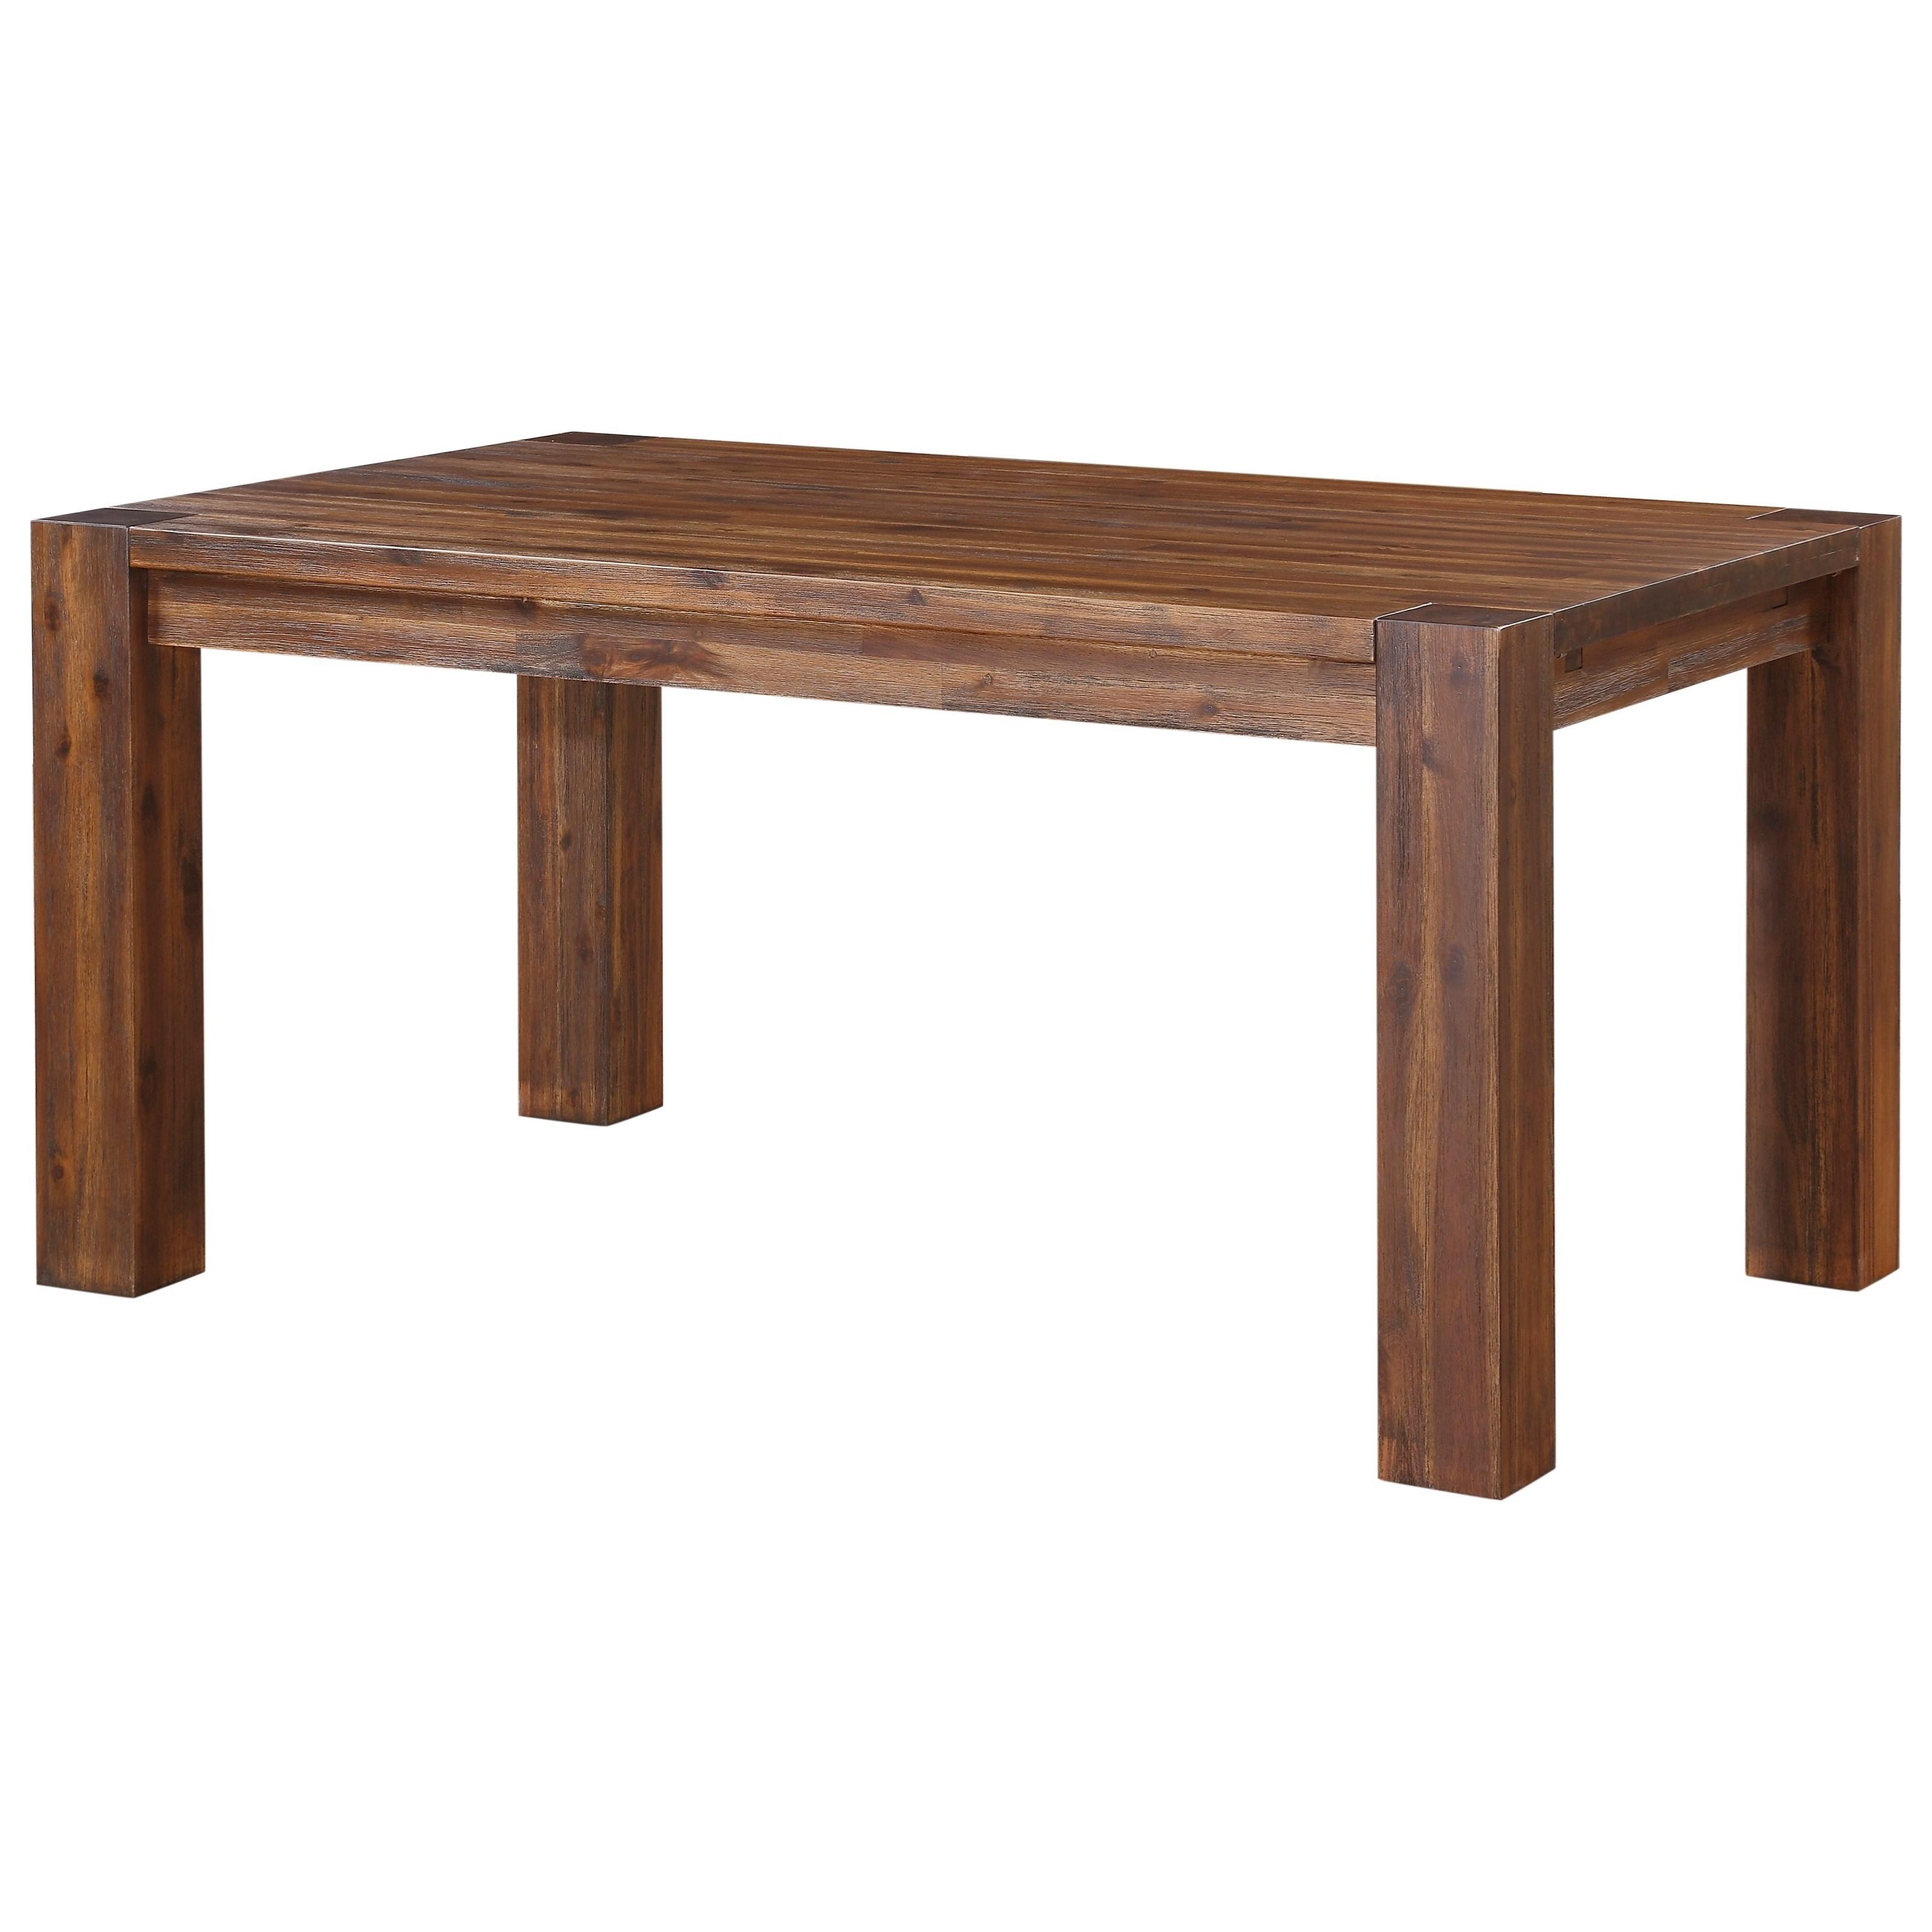 Rustic Dining Table MEADOW 3F4161 